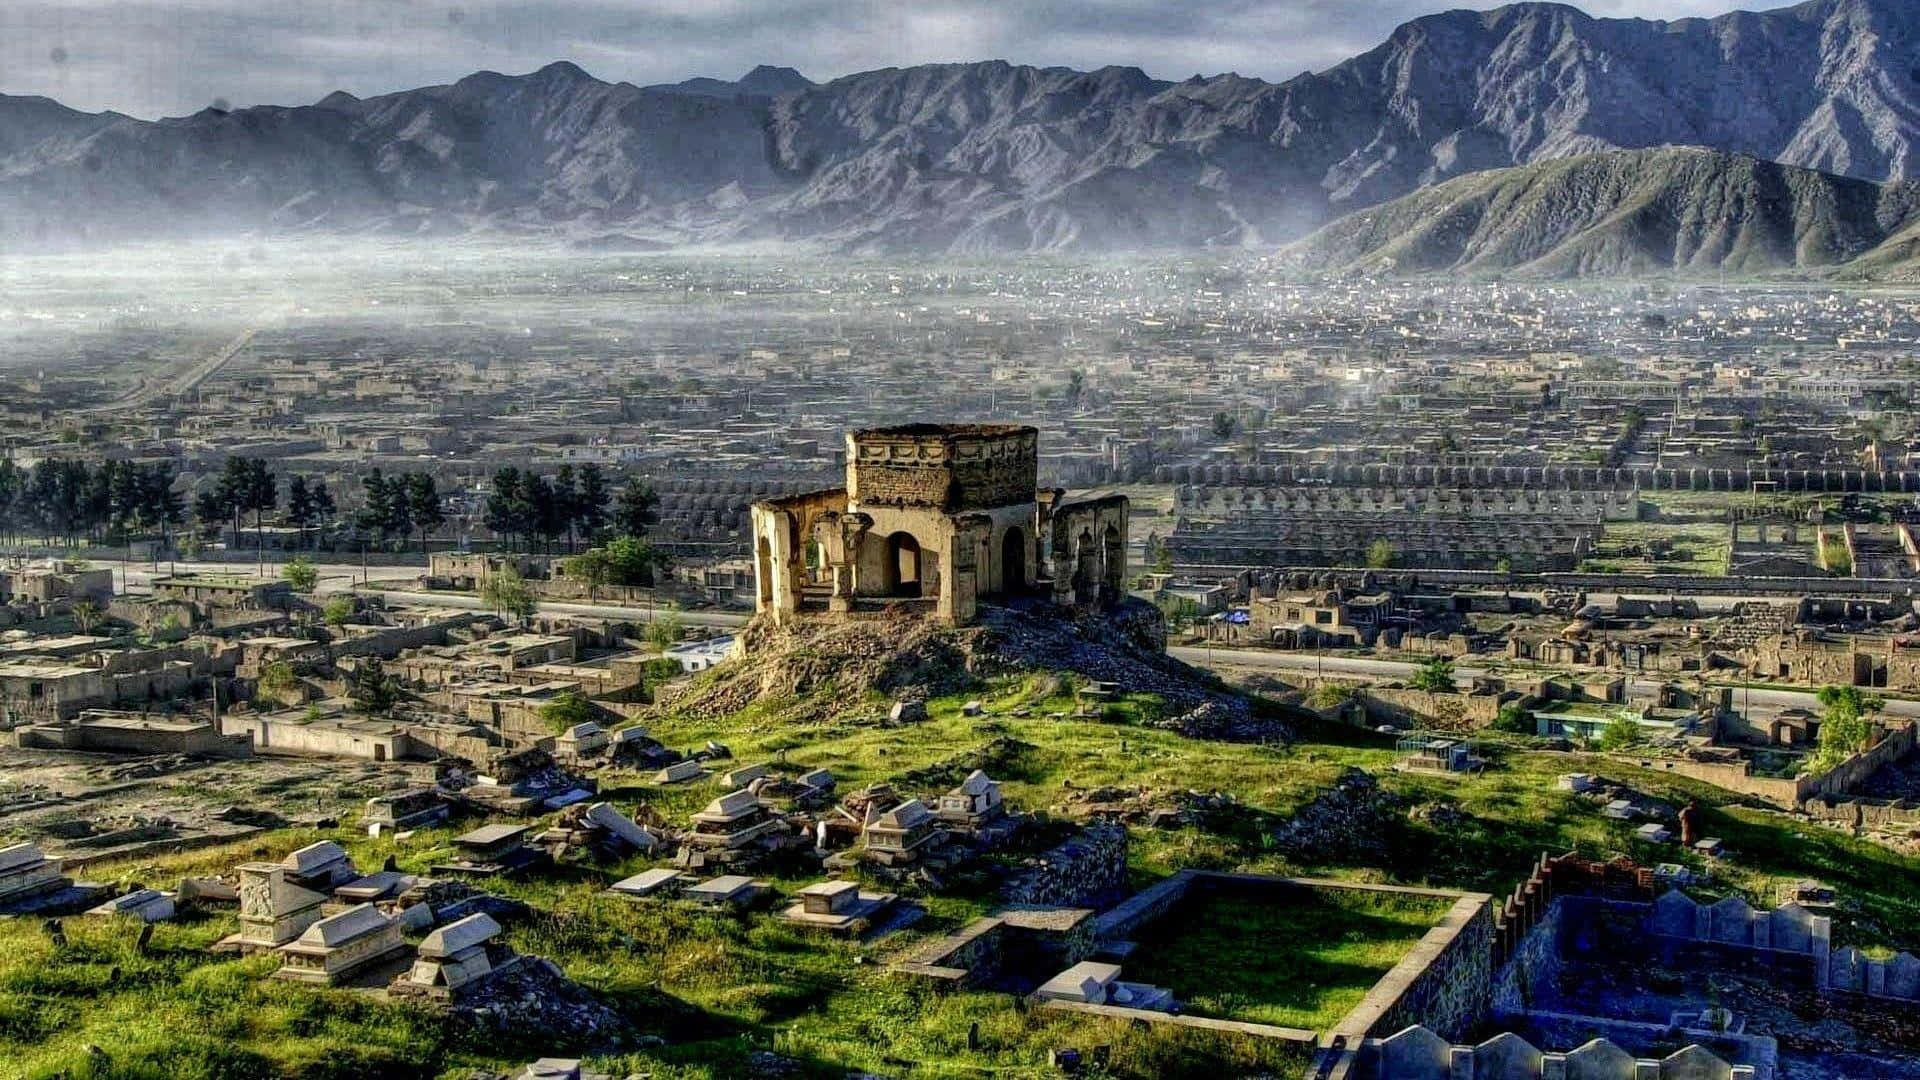 Immagini Dell'afghanistan